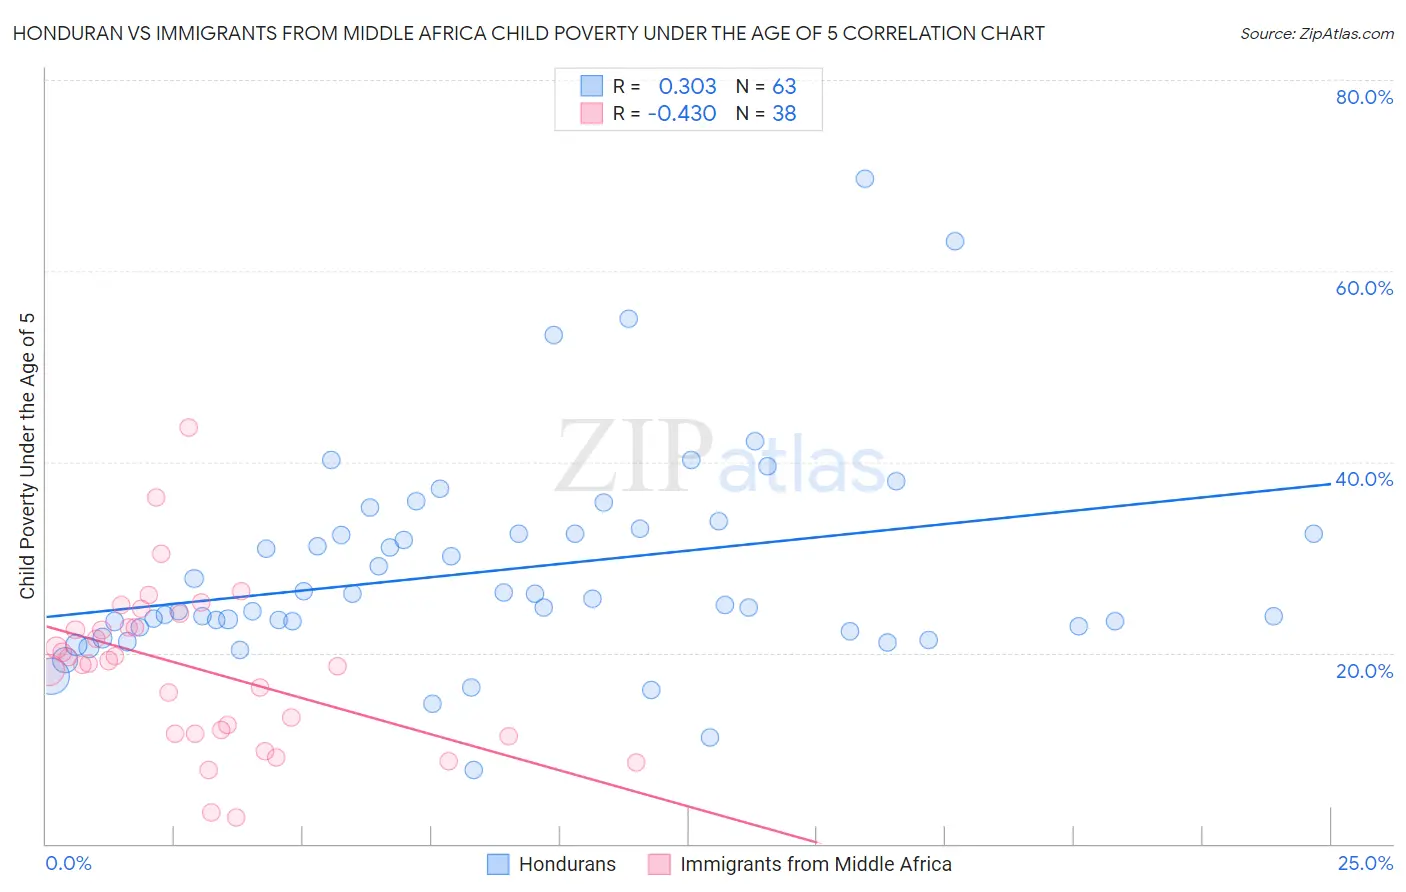 Honduran vs Immigrants from Middle Africa Child Poverty Under the Age of 5